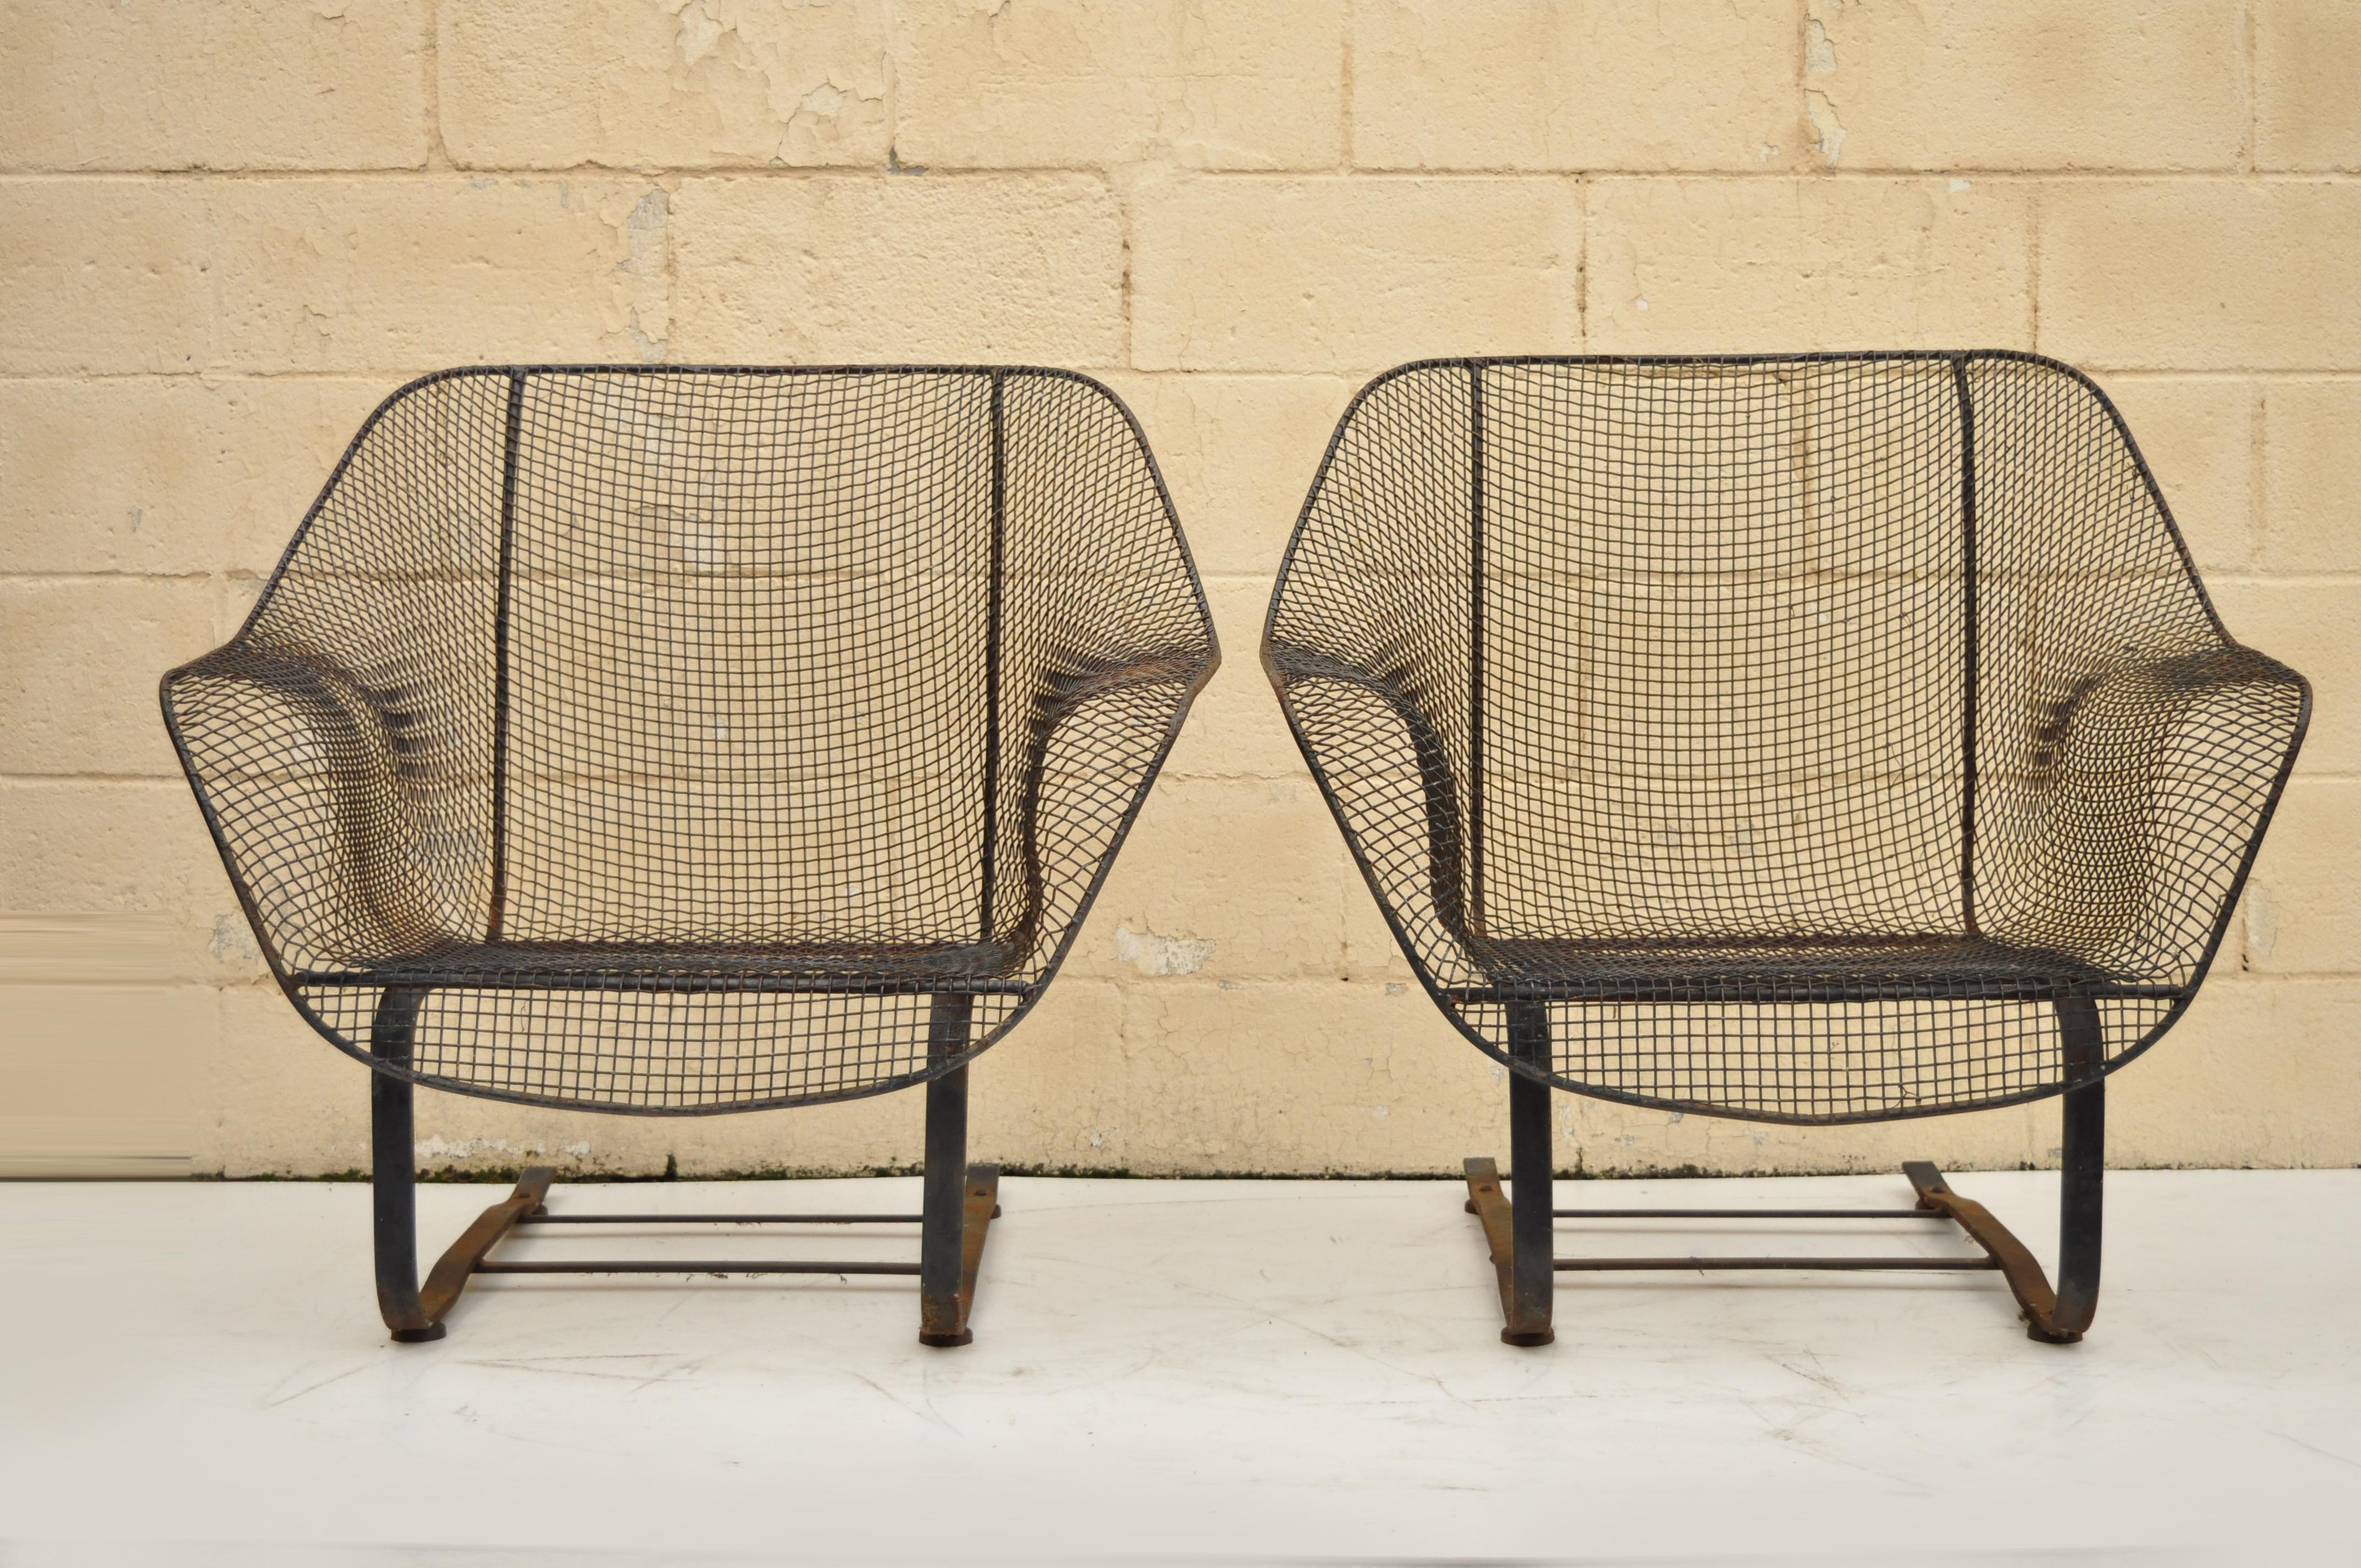 Pair of vintage Russell Woodard sculptura metal mesh wrought iron Bouncer lounge chairs. Items feature iron frame, metal mesh seats, iconic mid-century modern design, very nice vintage item, circa 1950. Measurements: 32